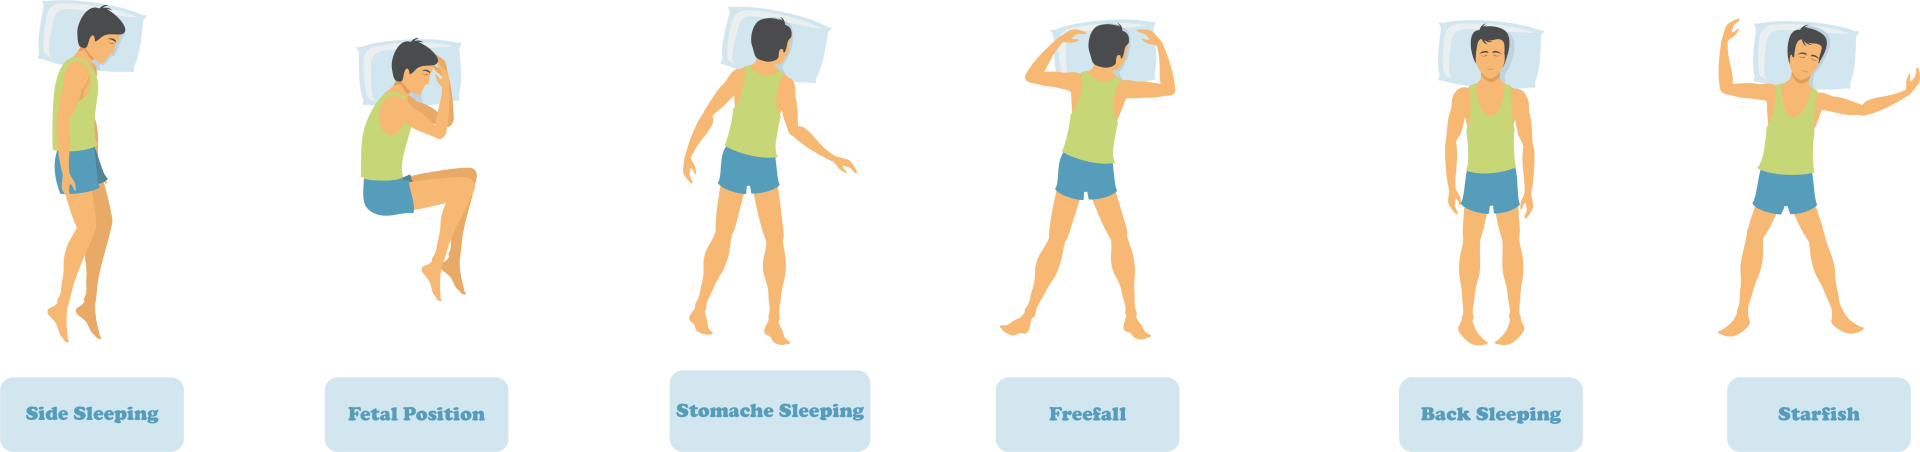 A graphic showing different sleep positions